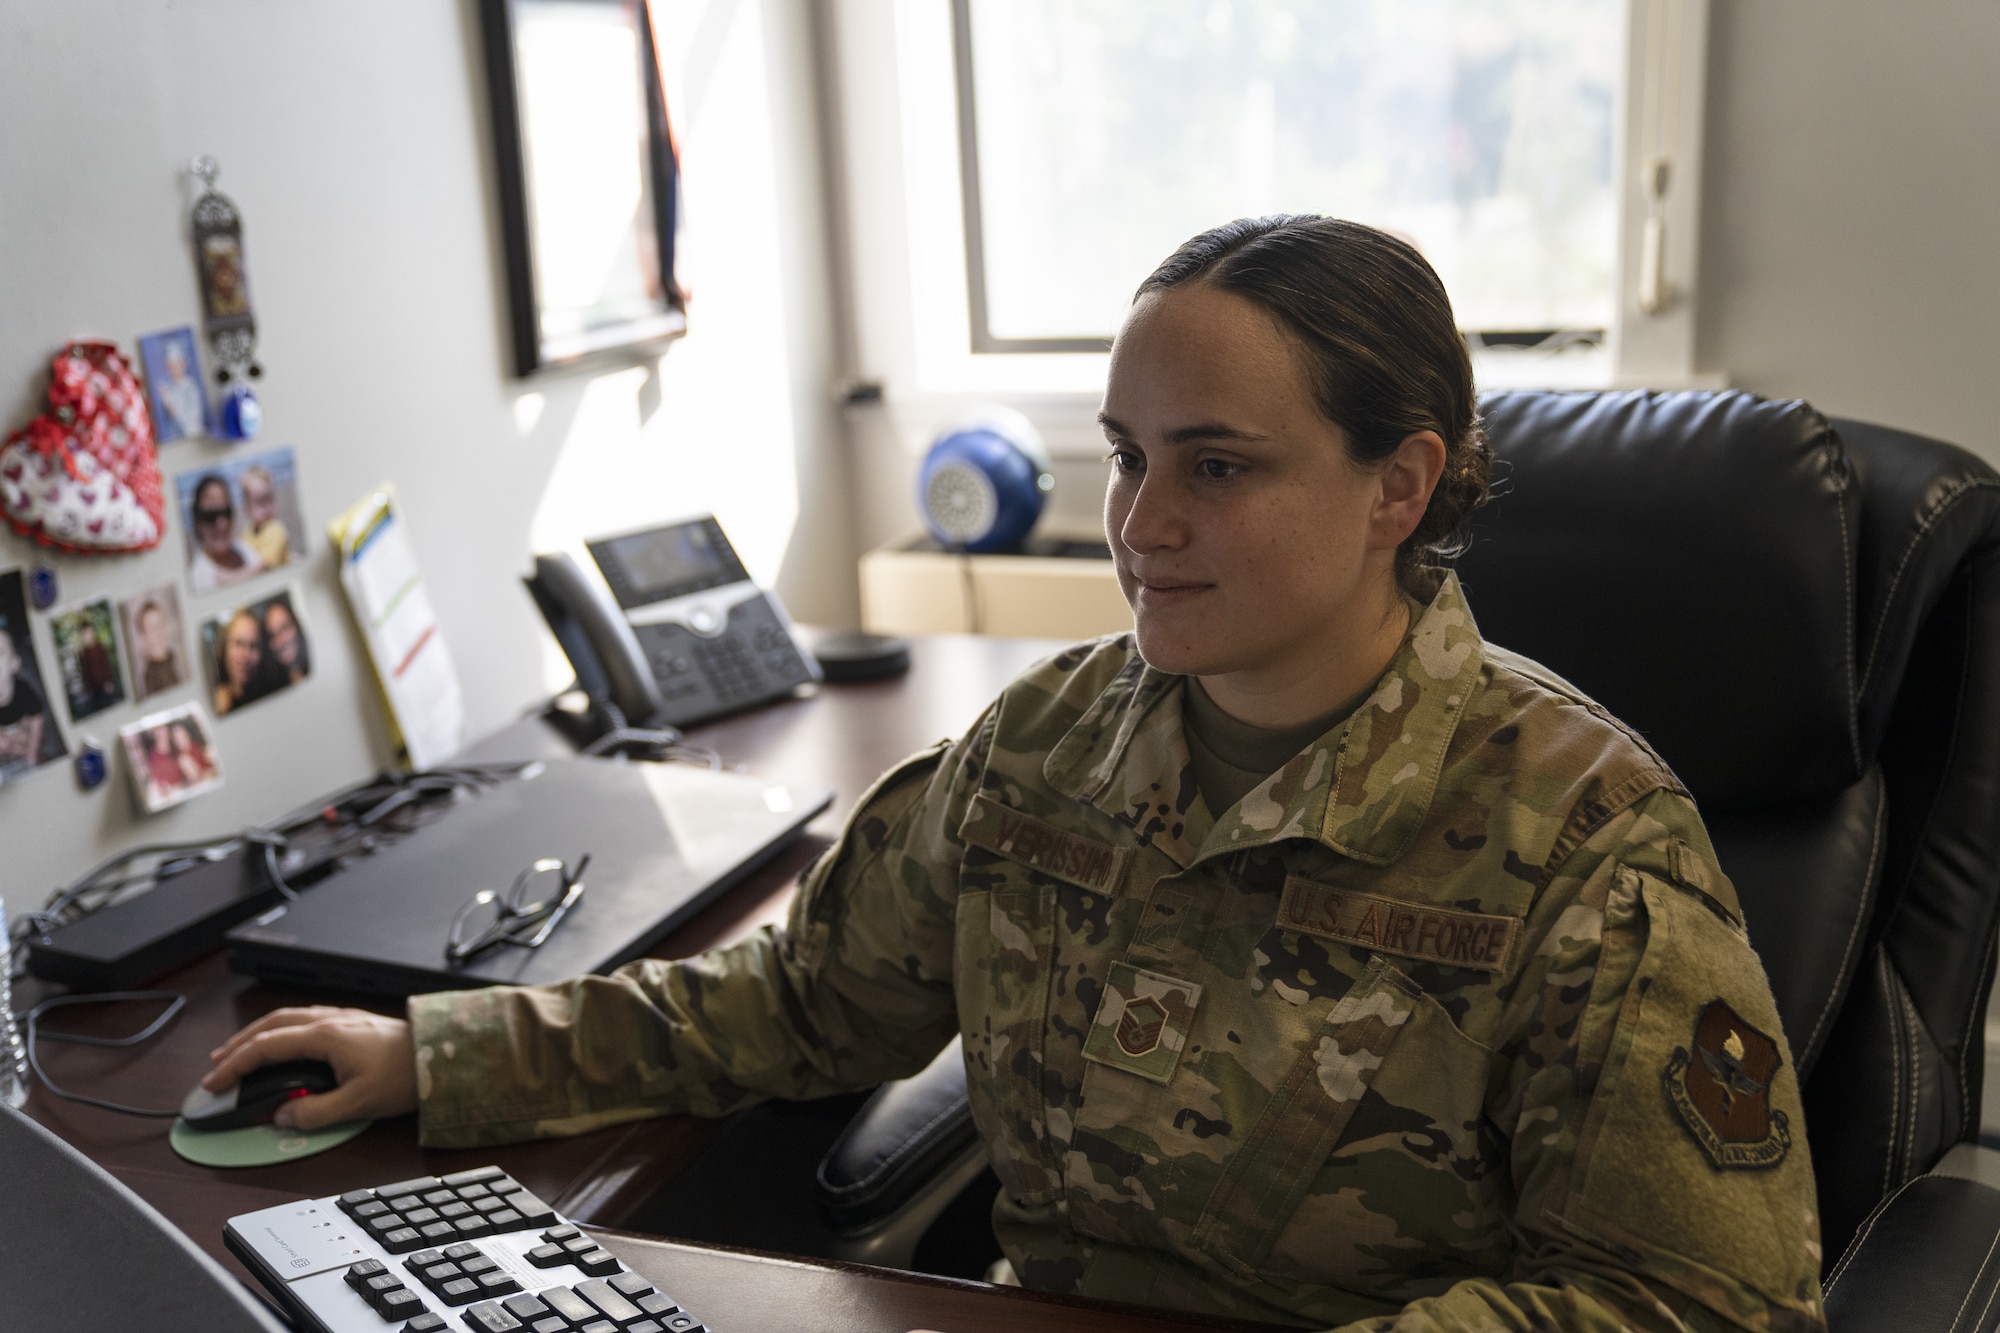 U.S. Air Force Master Sgt. Alexandria Verissimo, 81st Training Wing executive support services superintendent, uses a computer on Keesler Air Force Base, Mississippi, July 26, 2022. Education With Industry is a program that allows service members and civilians to be imbedded into companies to learn professional competencies. (U.S Air Force photo by Airman 1st Class Trenten Walters)